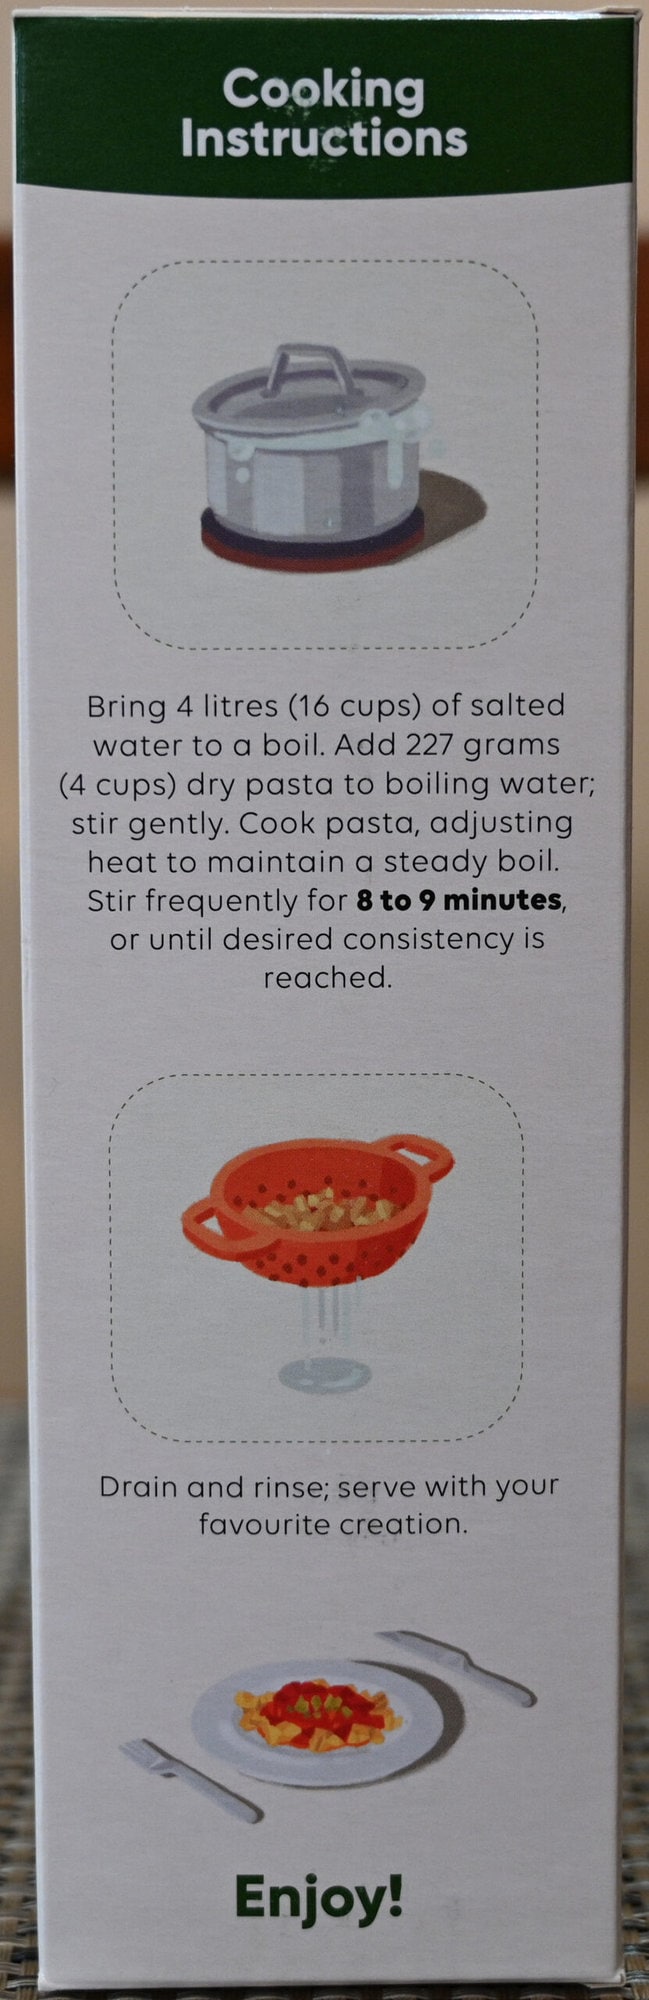 Image of the cooking instructions for the chickapea pasta from the back of the box.